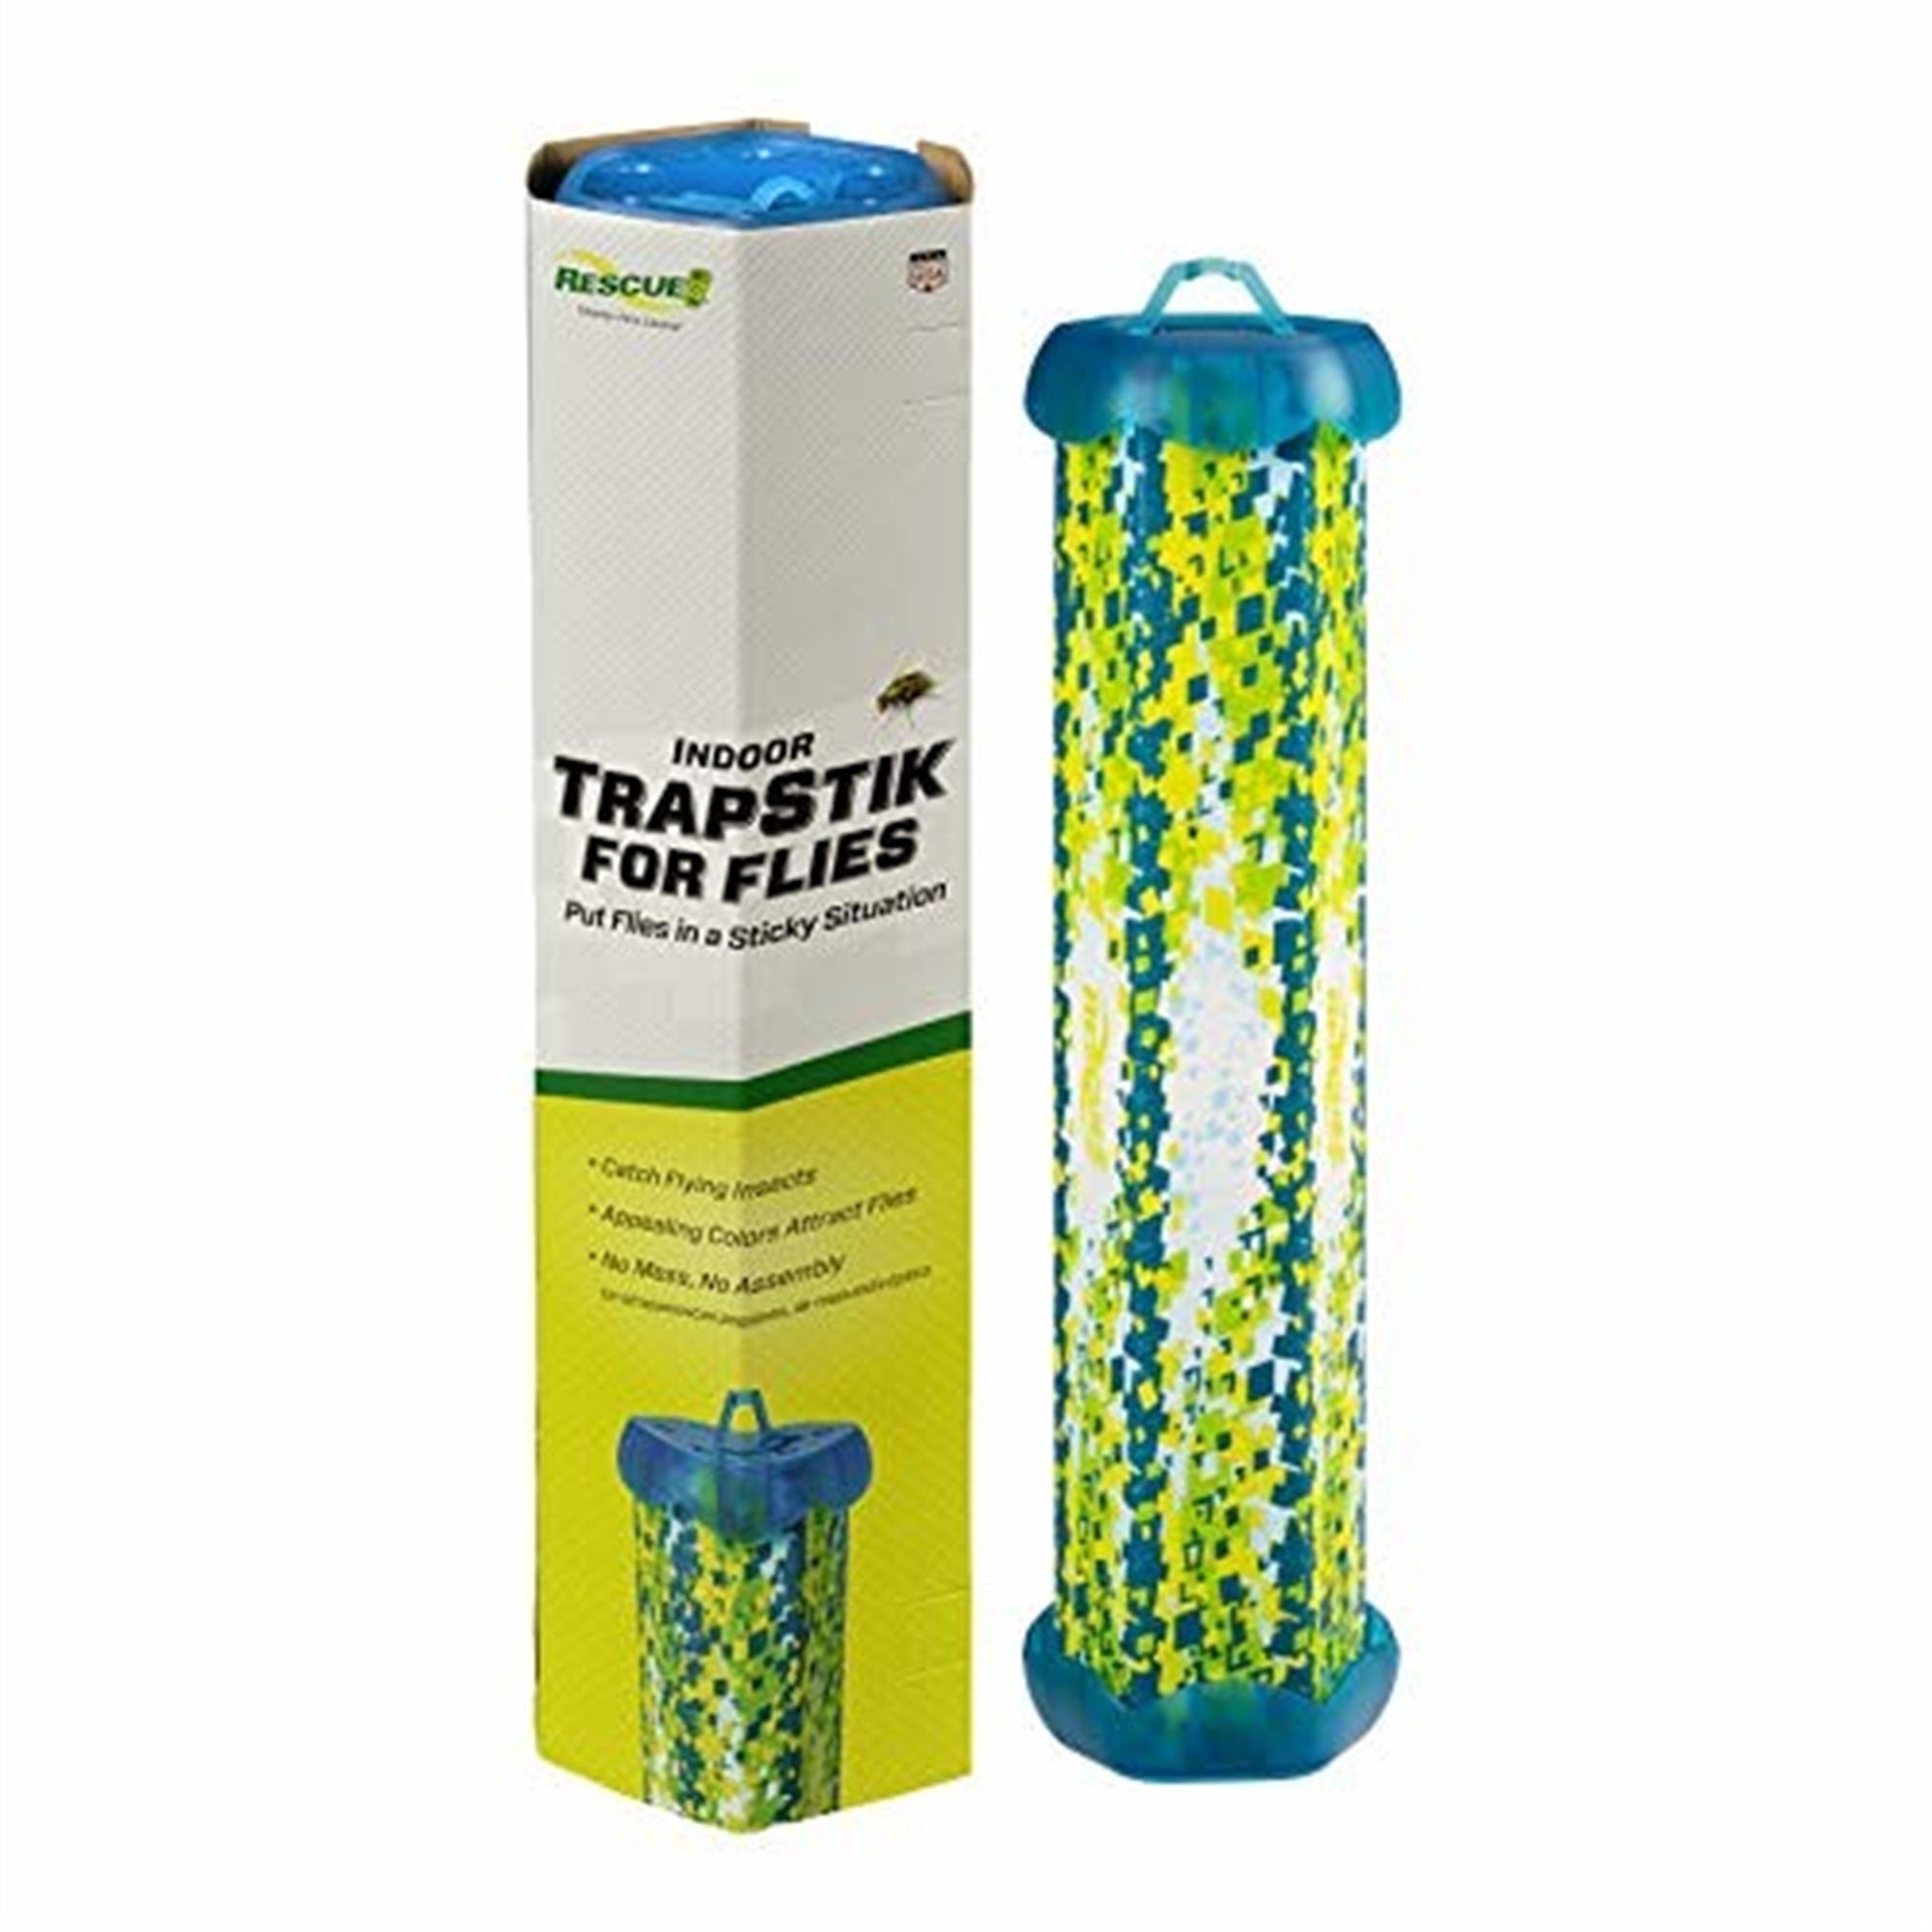 RESCUE Non-Toxic TrapStik for Flies – Indoor Hanging Fly Trap